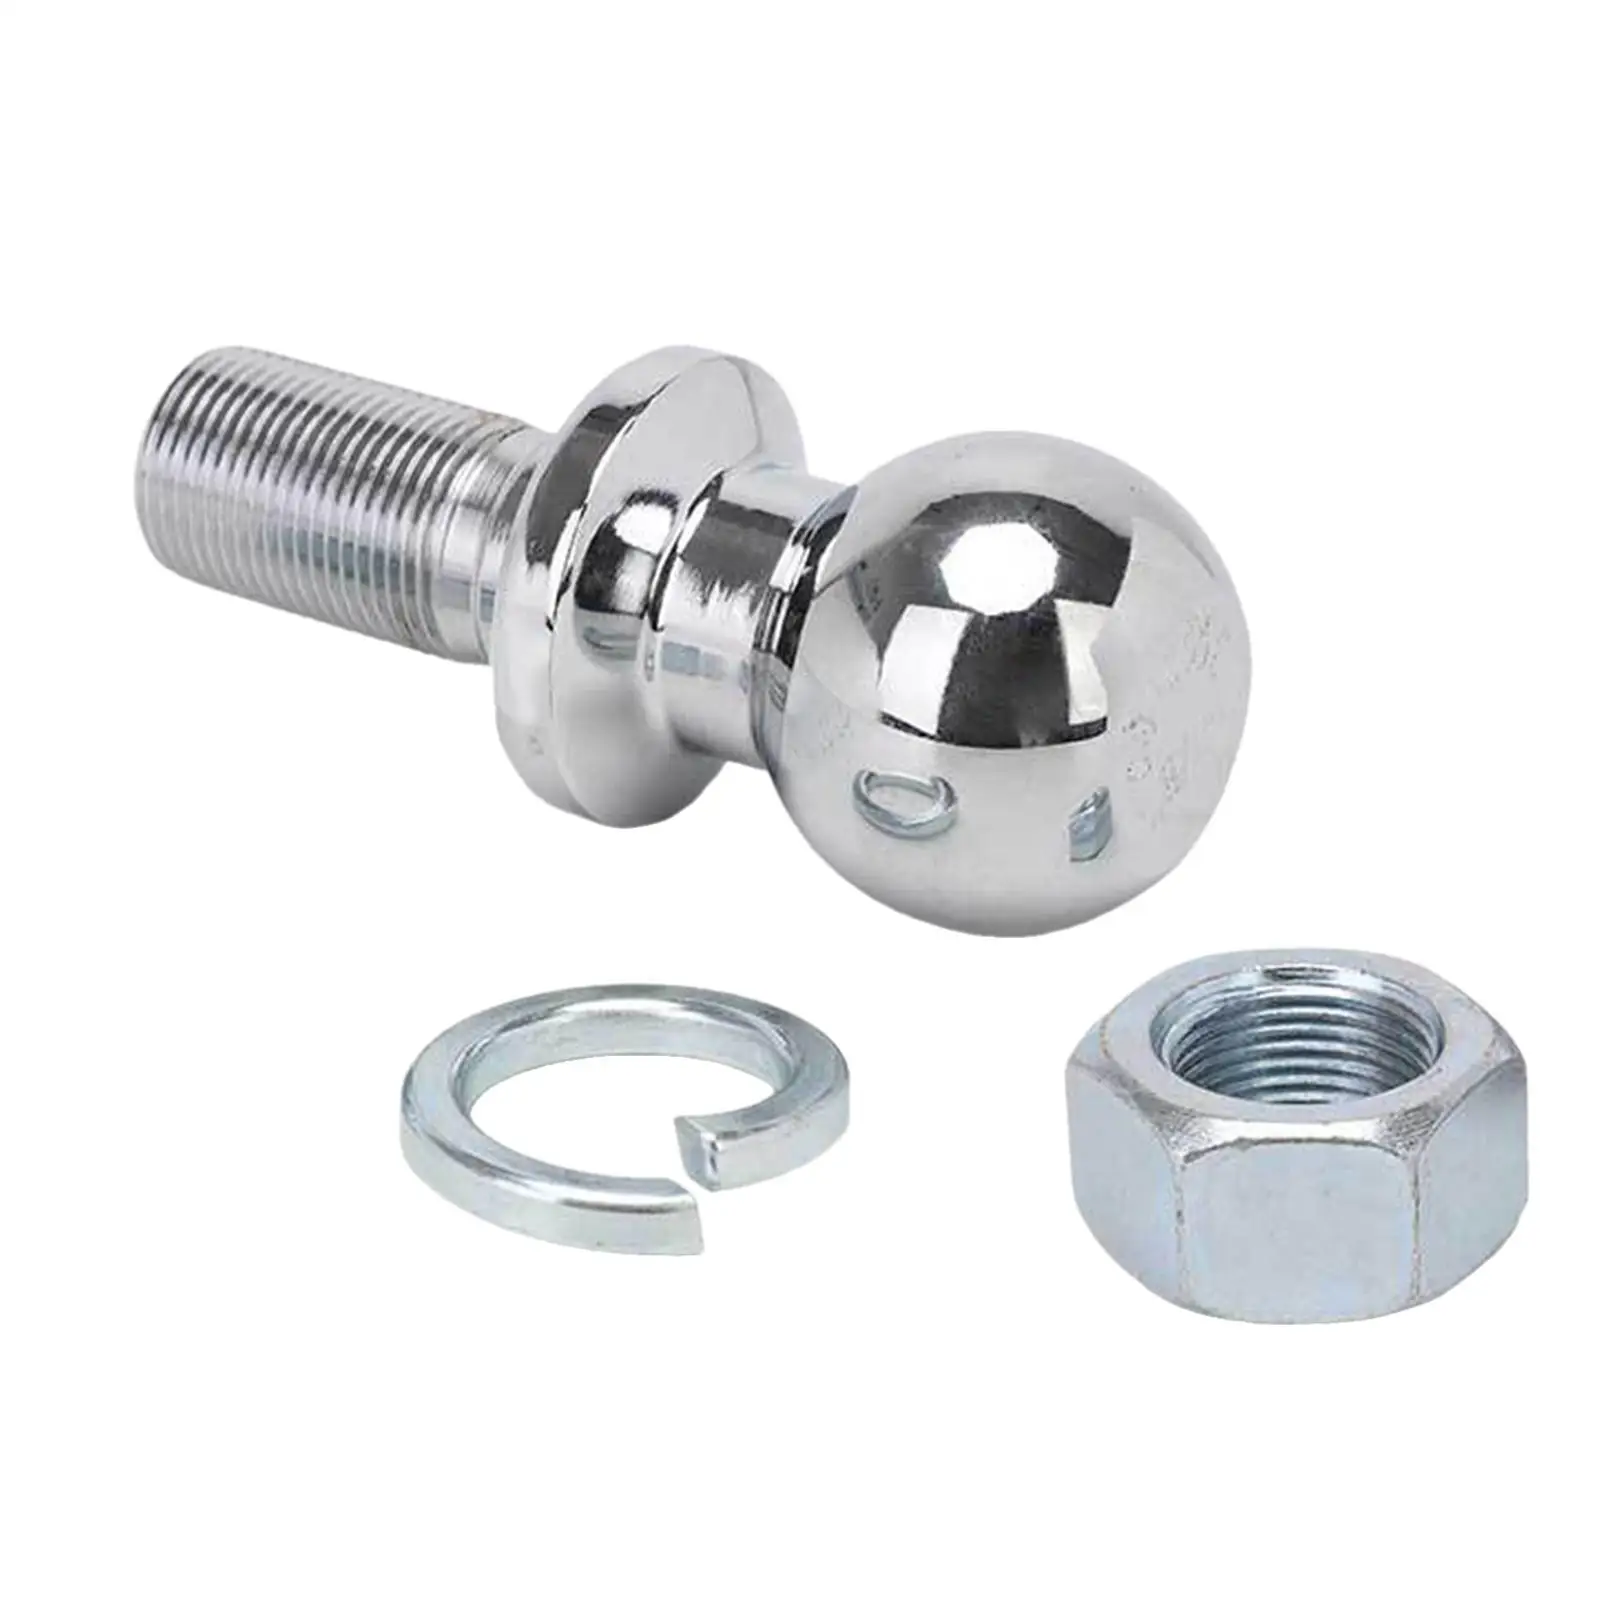 Lawn Tractor Hitch Ball Threaded Connection 22 mm Accessories Replaces Metal